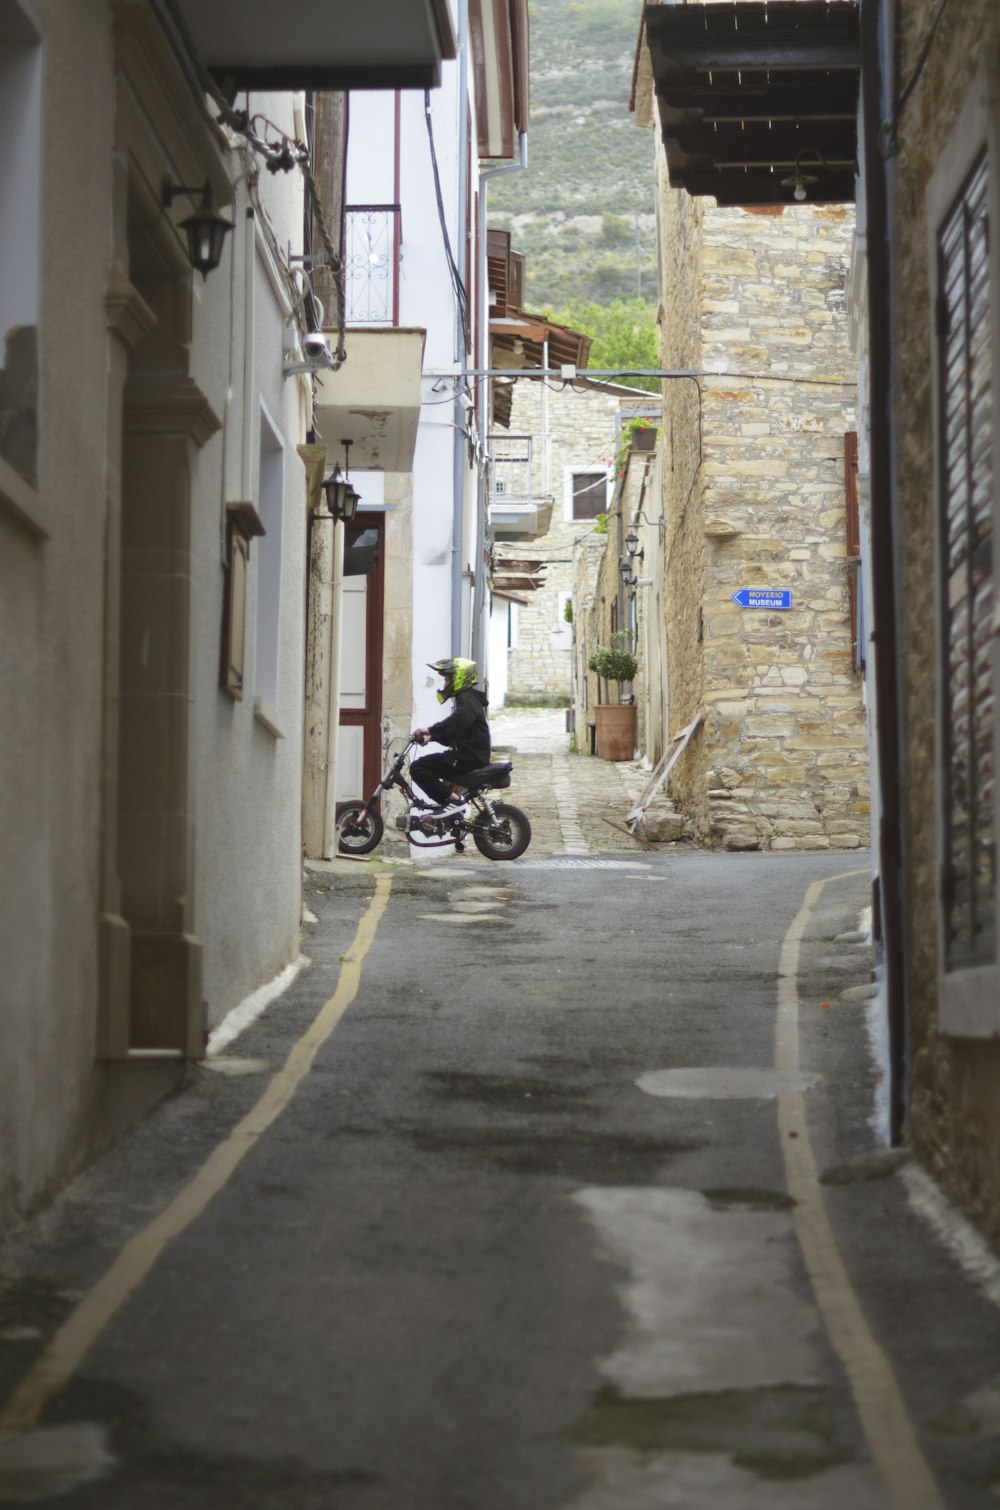 a person riding a motorcycle down a narrow street